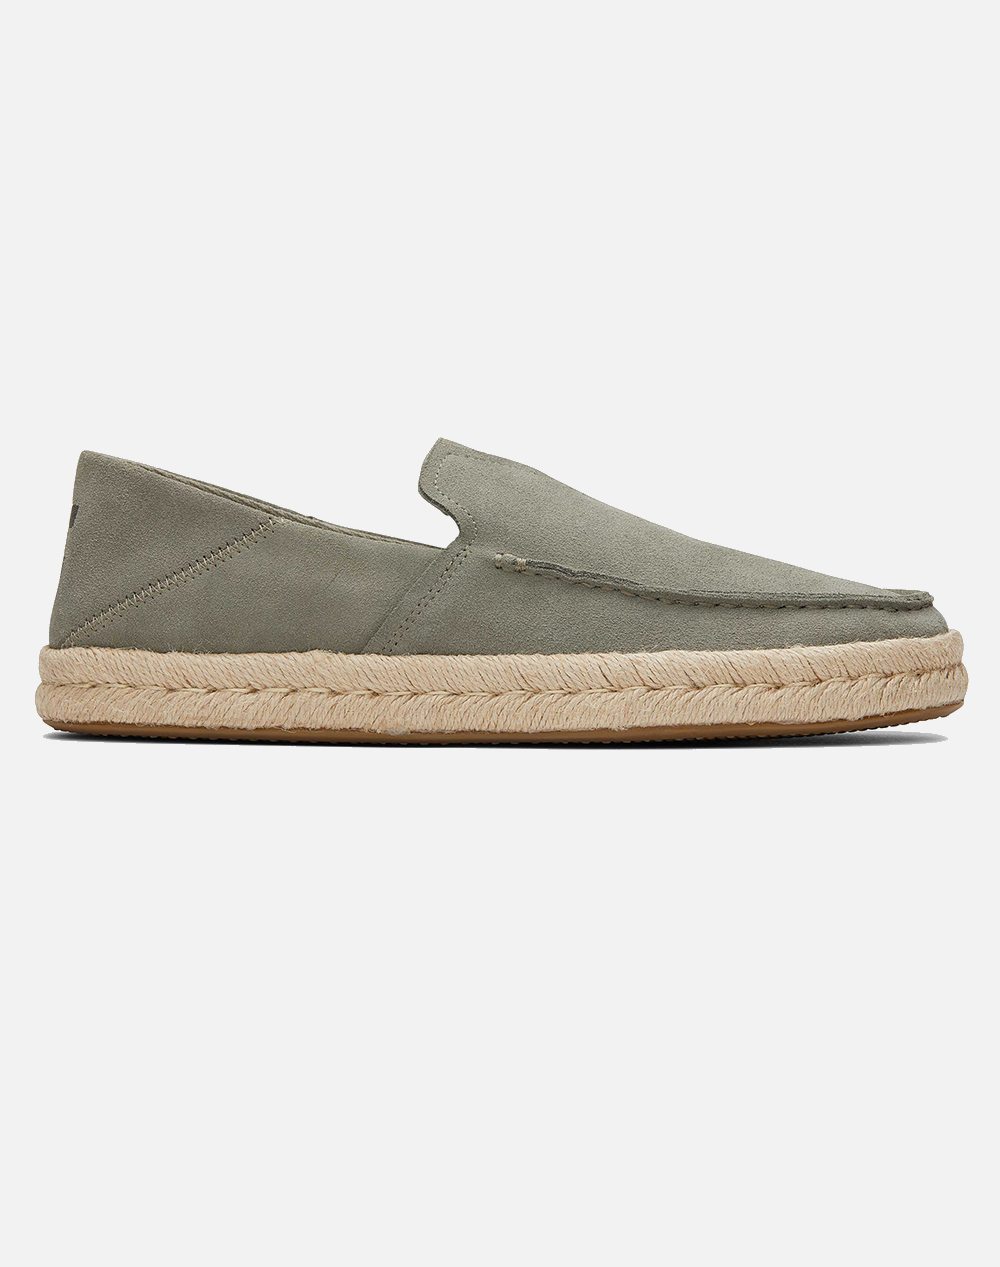 TOMS VET GRY SUEDE MN ALONSO ESP 10020874-OLIVE Olive 3820ATOMS6430046_3821